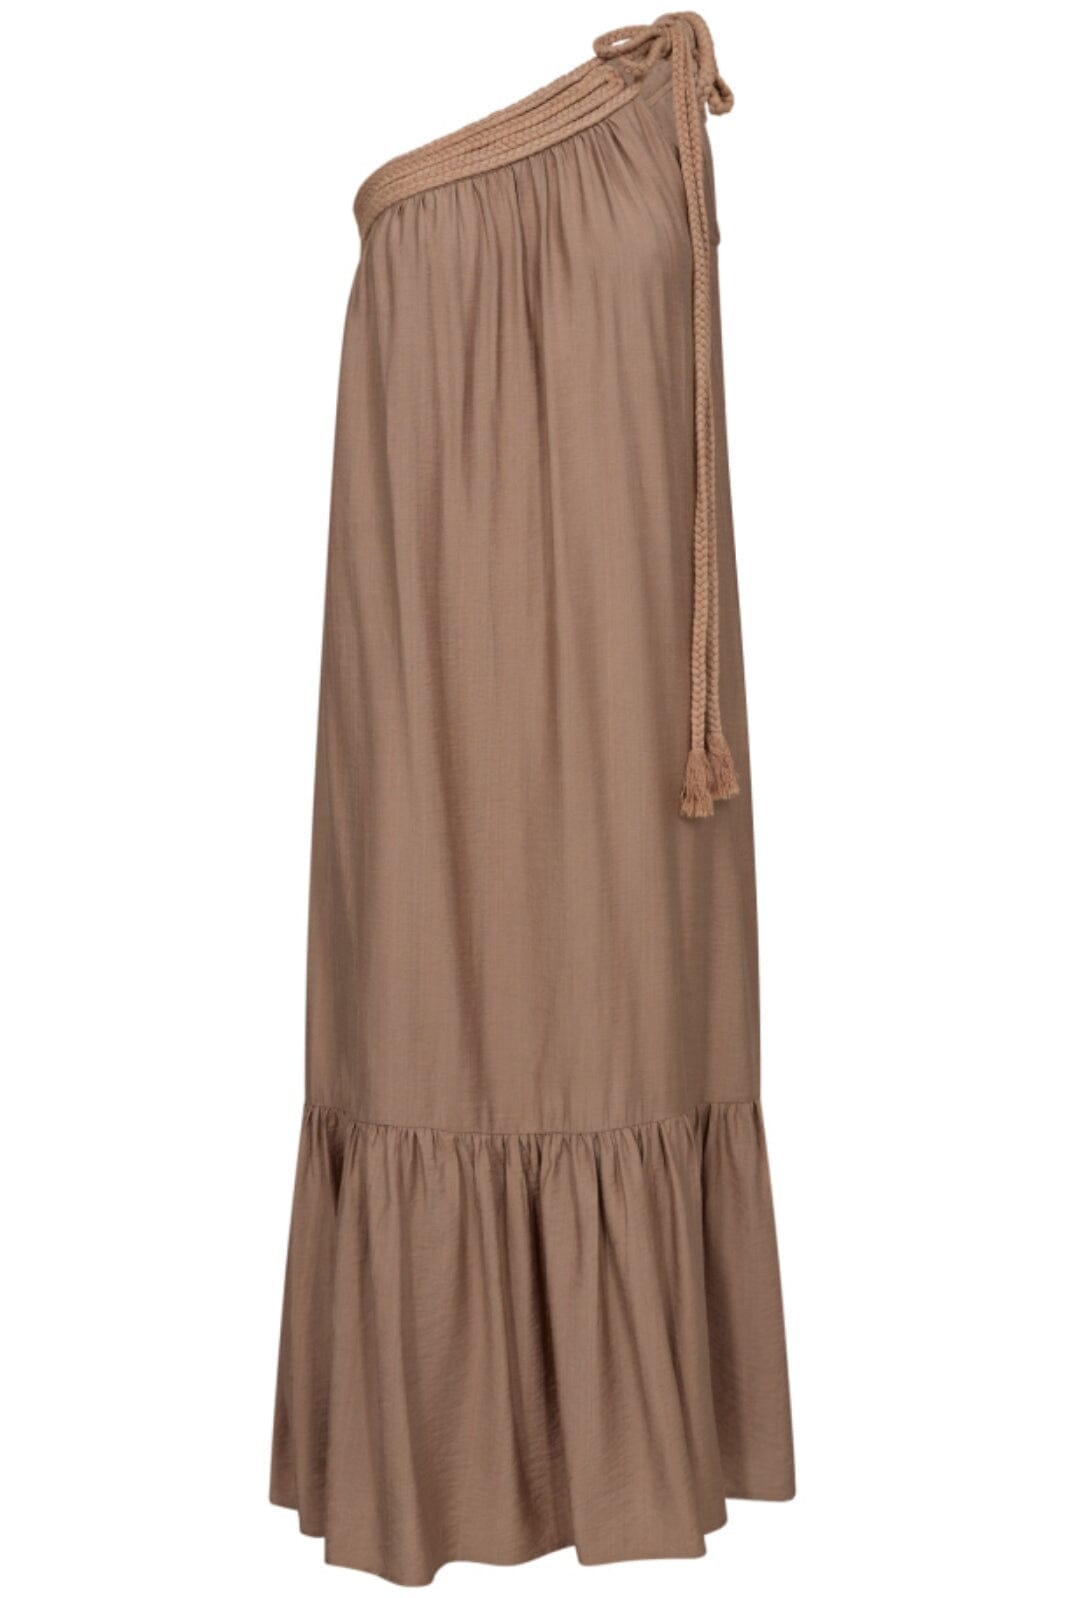 Co´couture - Heracc Asym Dress 36312 - 144 Nude Kjoler 